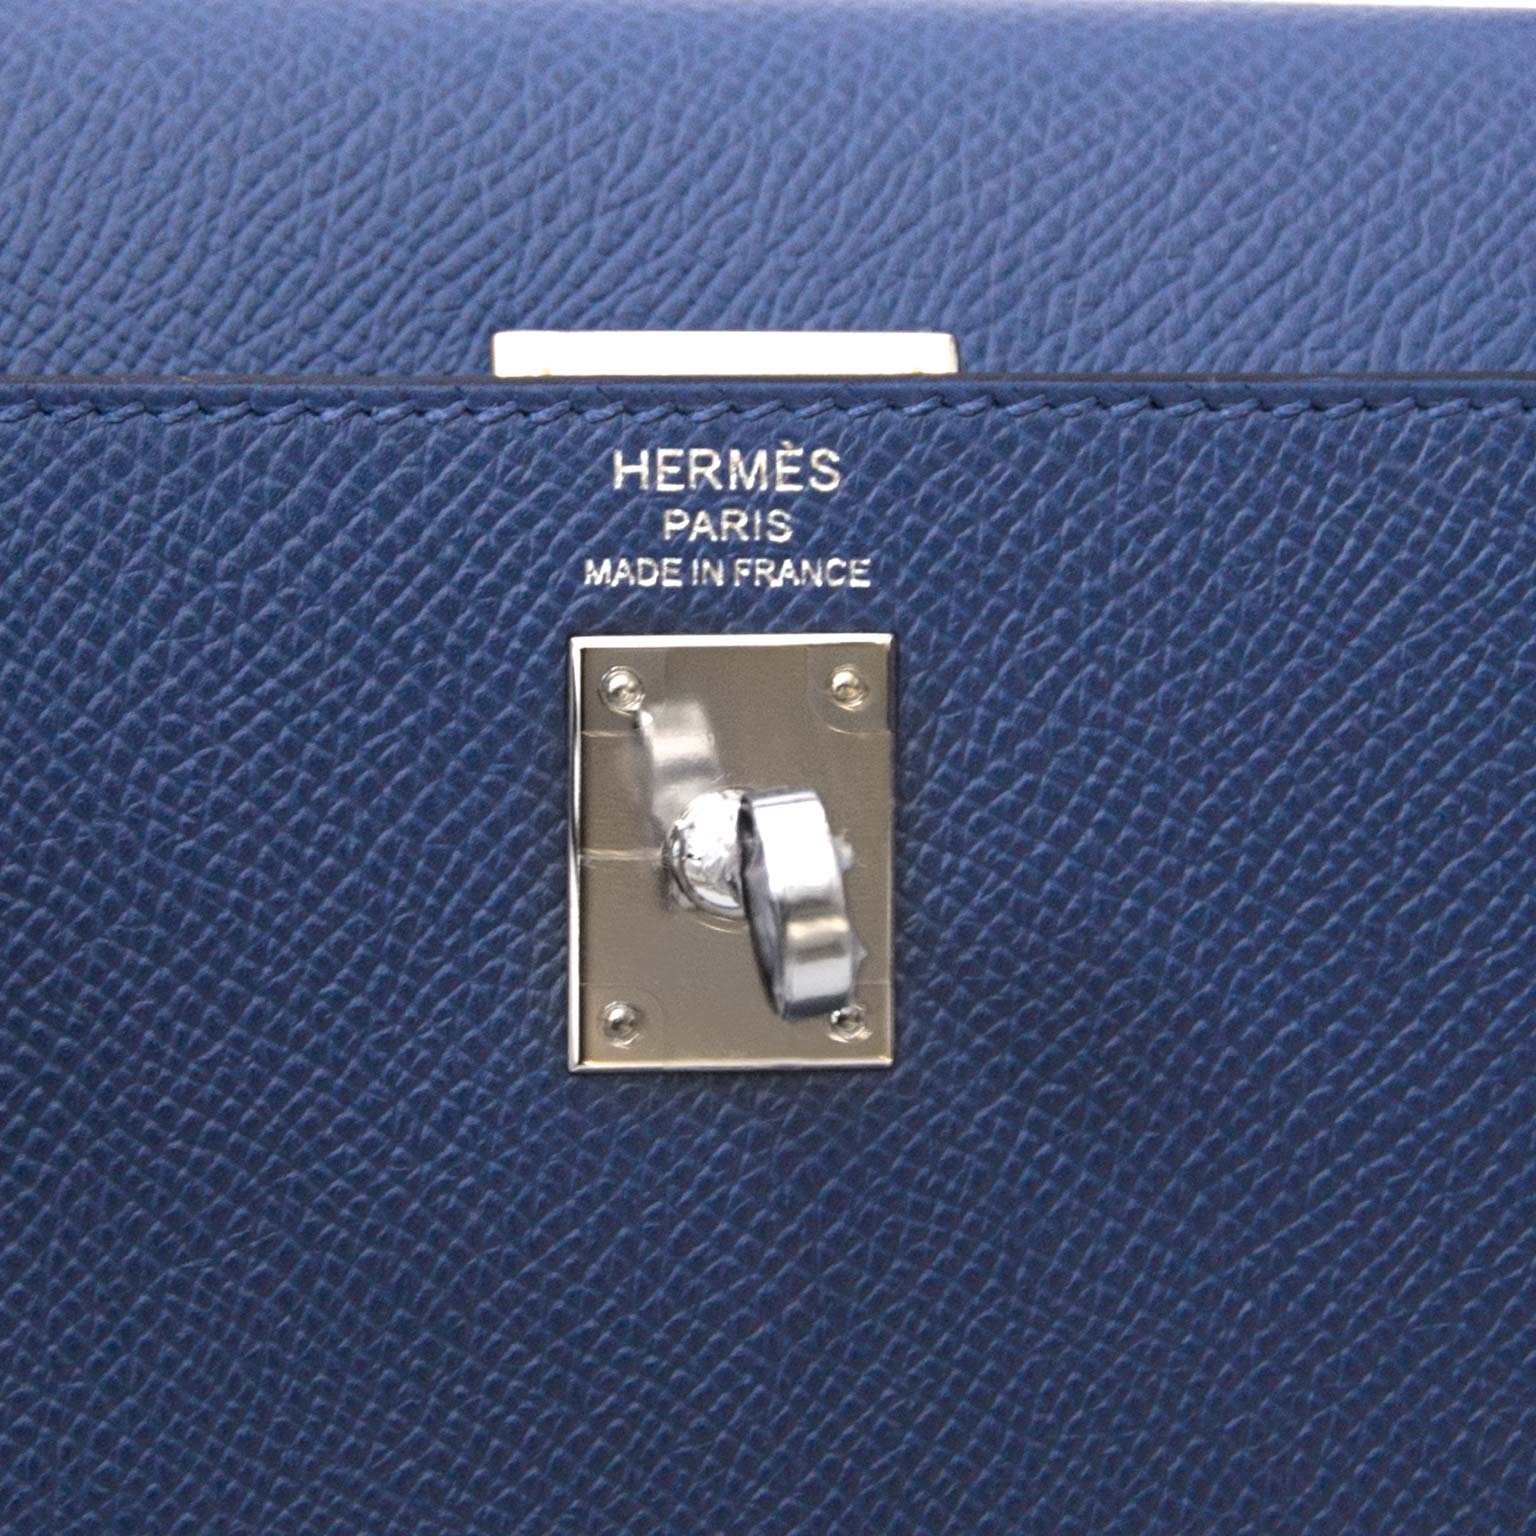 Never Used* Hermès Kelly Sellier 25 Epsom Bleu Brighton PHW ○ Labellov ○  Buy and Sell Authentic Luxury